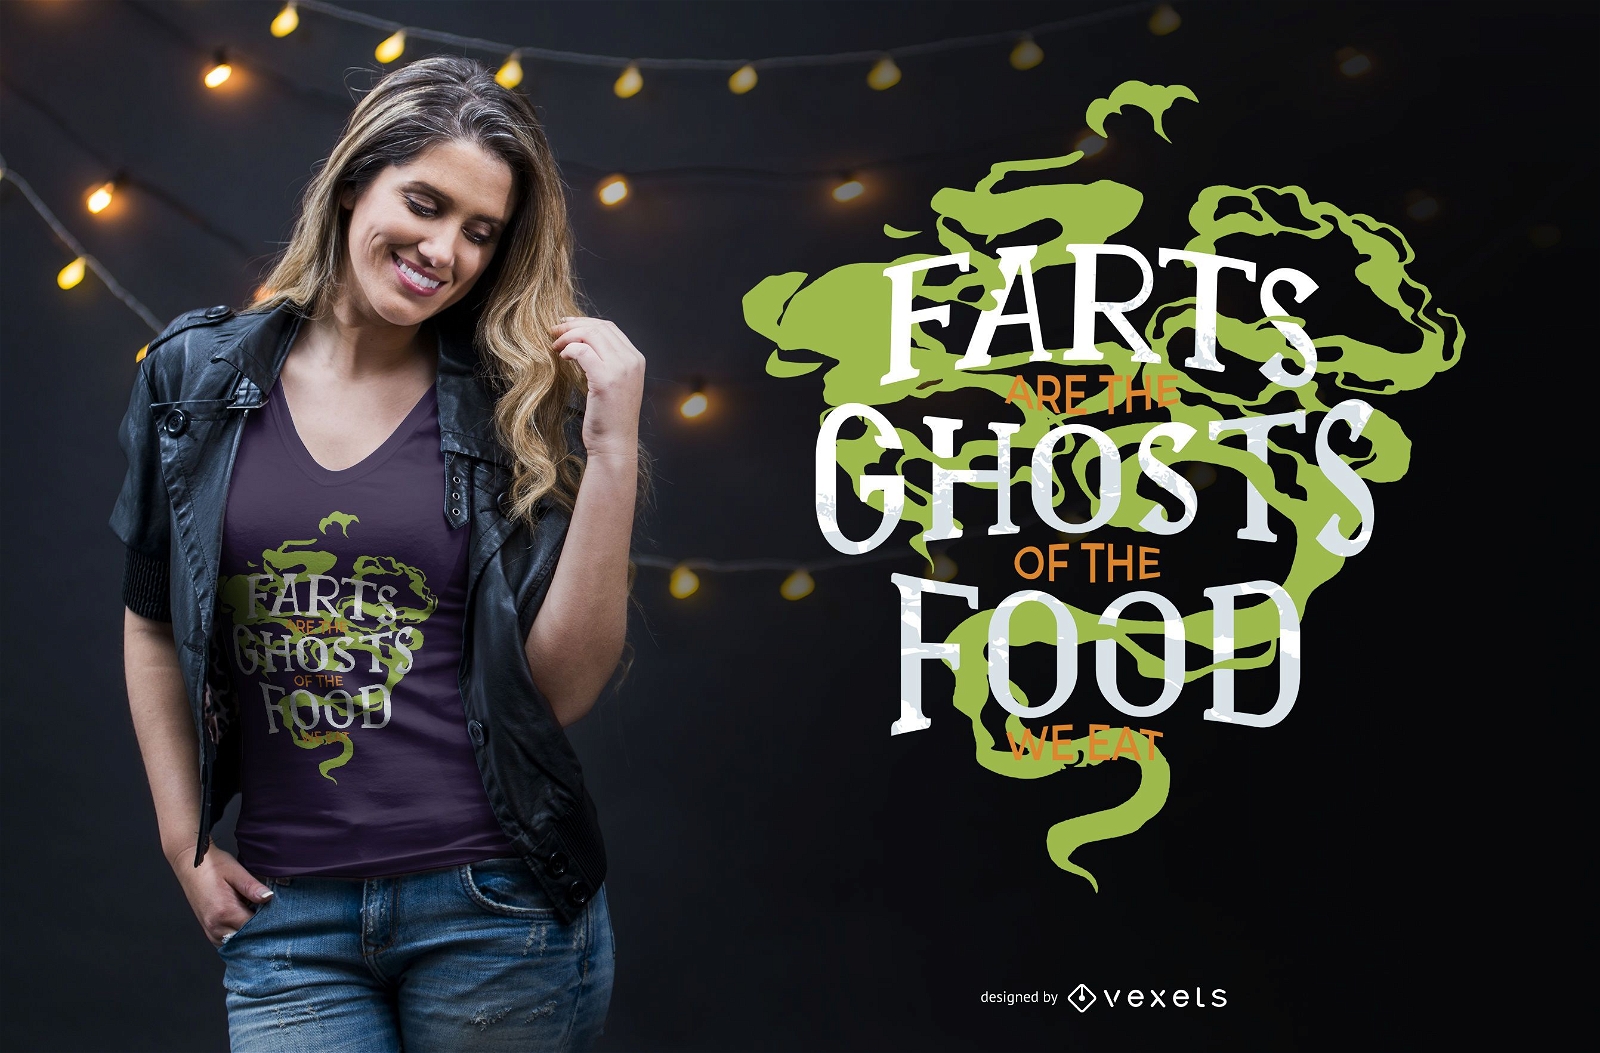 Fart Ghost Funny Quote Design